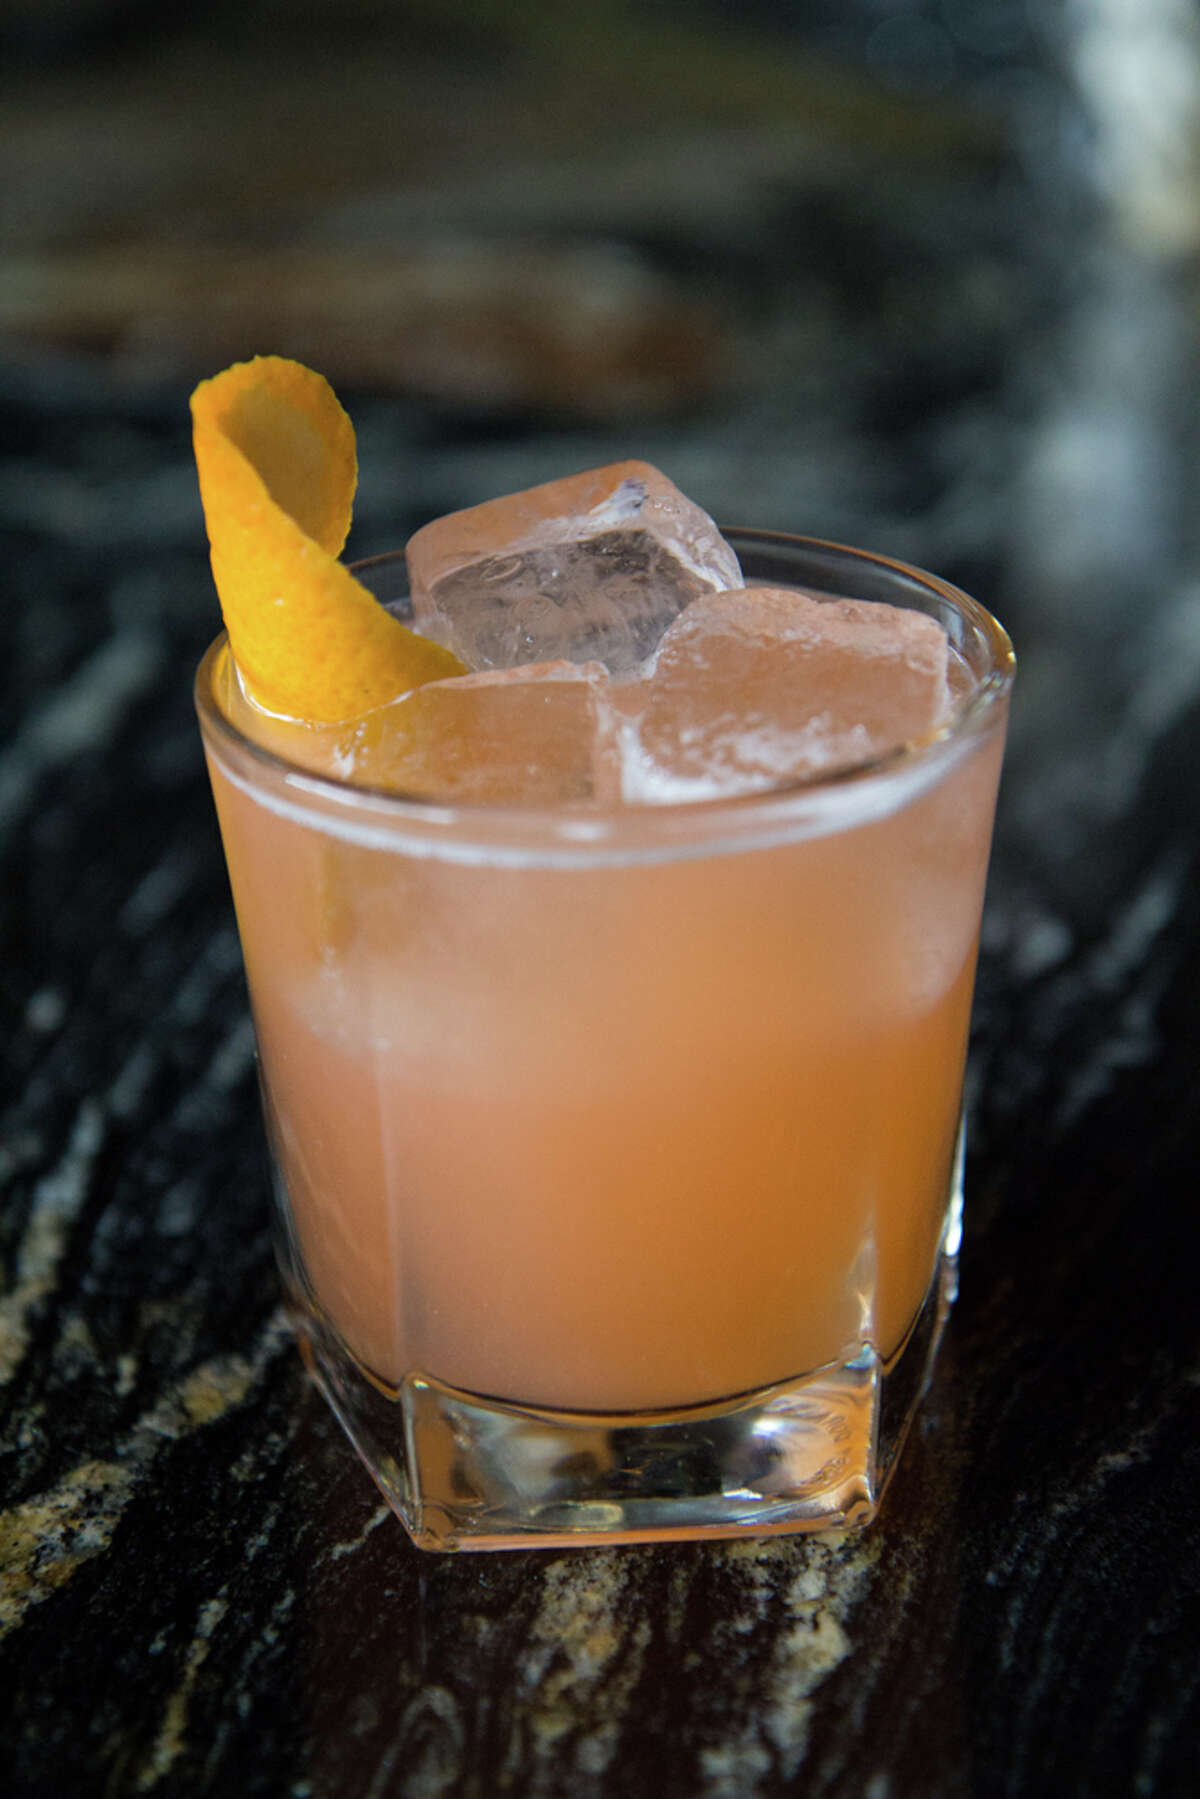 Tiki Tossback is a summer cocktail from Stone's Throw bar in Houston. It's made with vodka, coconut rum, Aperol and tiki bitters.